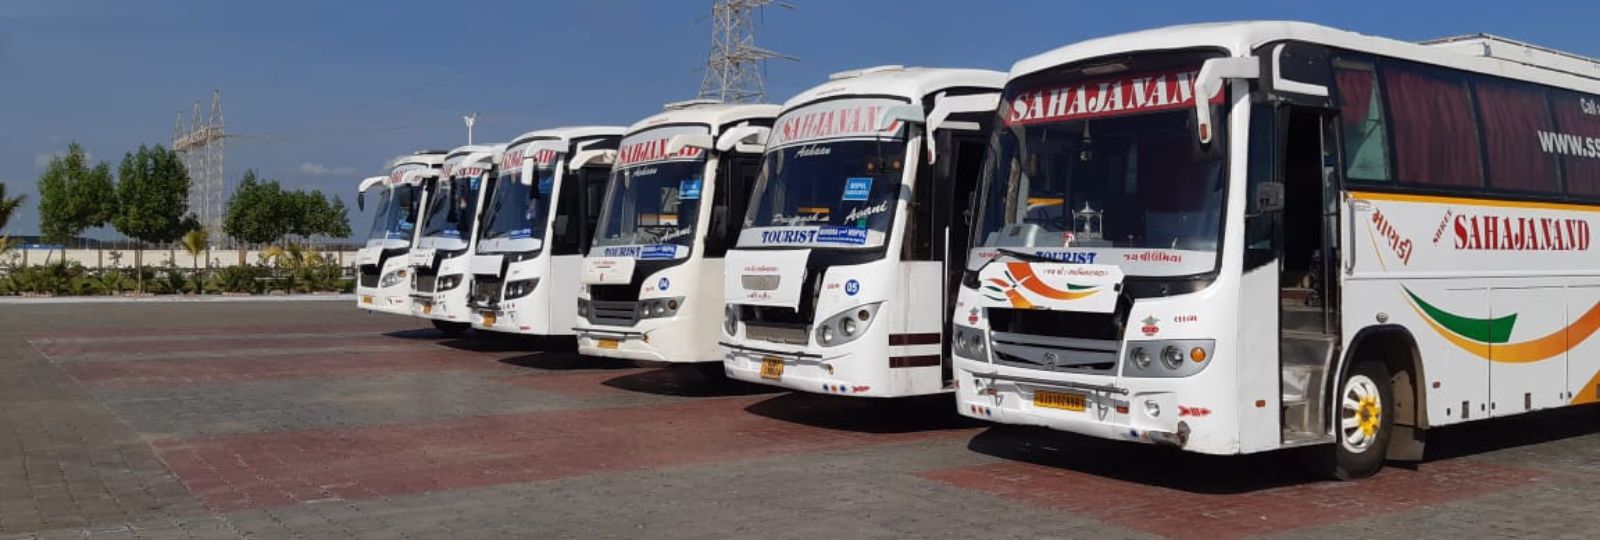 Bus Hire in ahmedabad